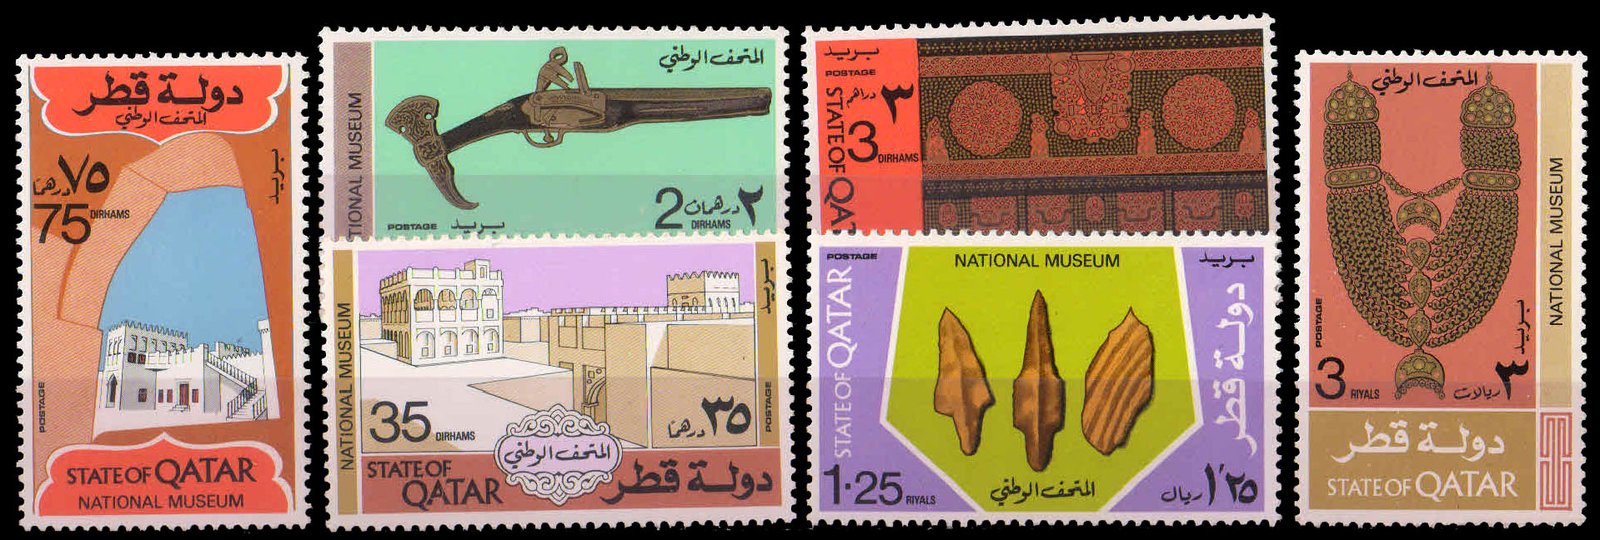 QATAR 1975-Opening of National Museum, Pistol, Mosaic, Buildings, Gold Necklace, Set of 6, MNH, Cat � 45-S.G. 543-548